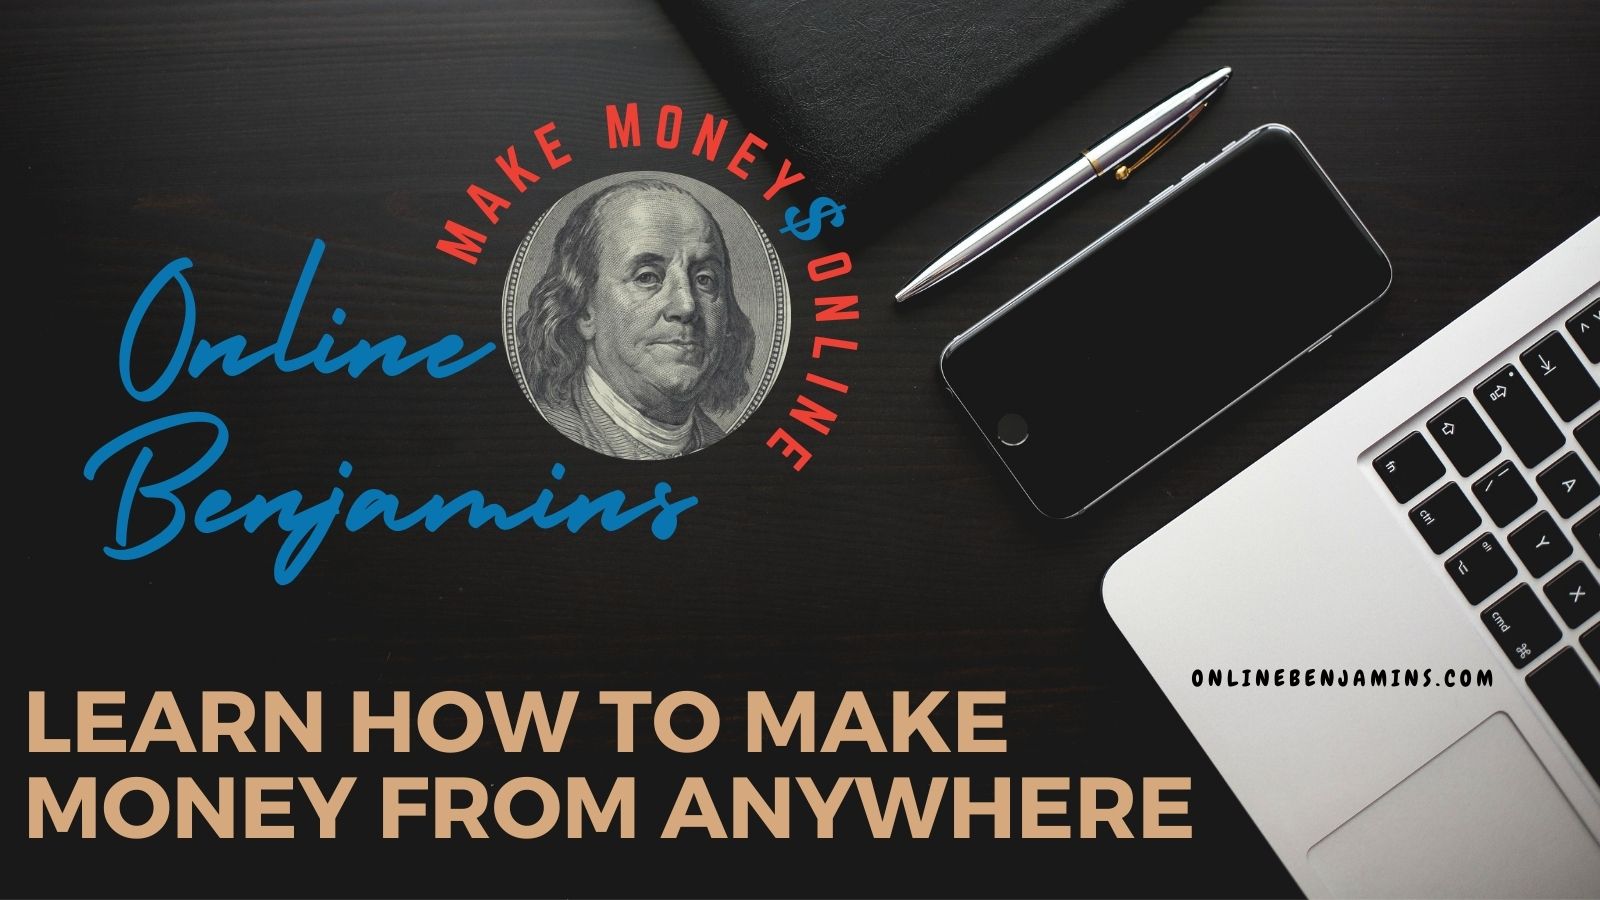 Cover photo with laptop pen and smartphone on the desk - Learn to make money from anywhere.